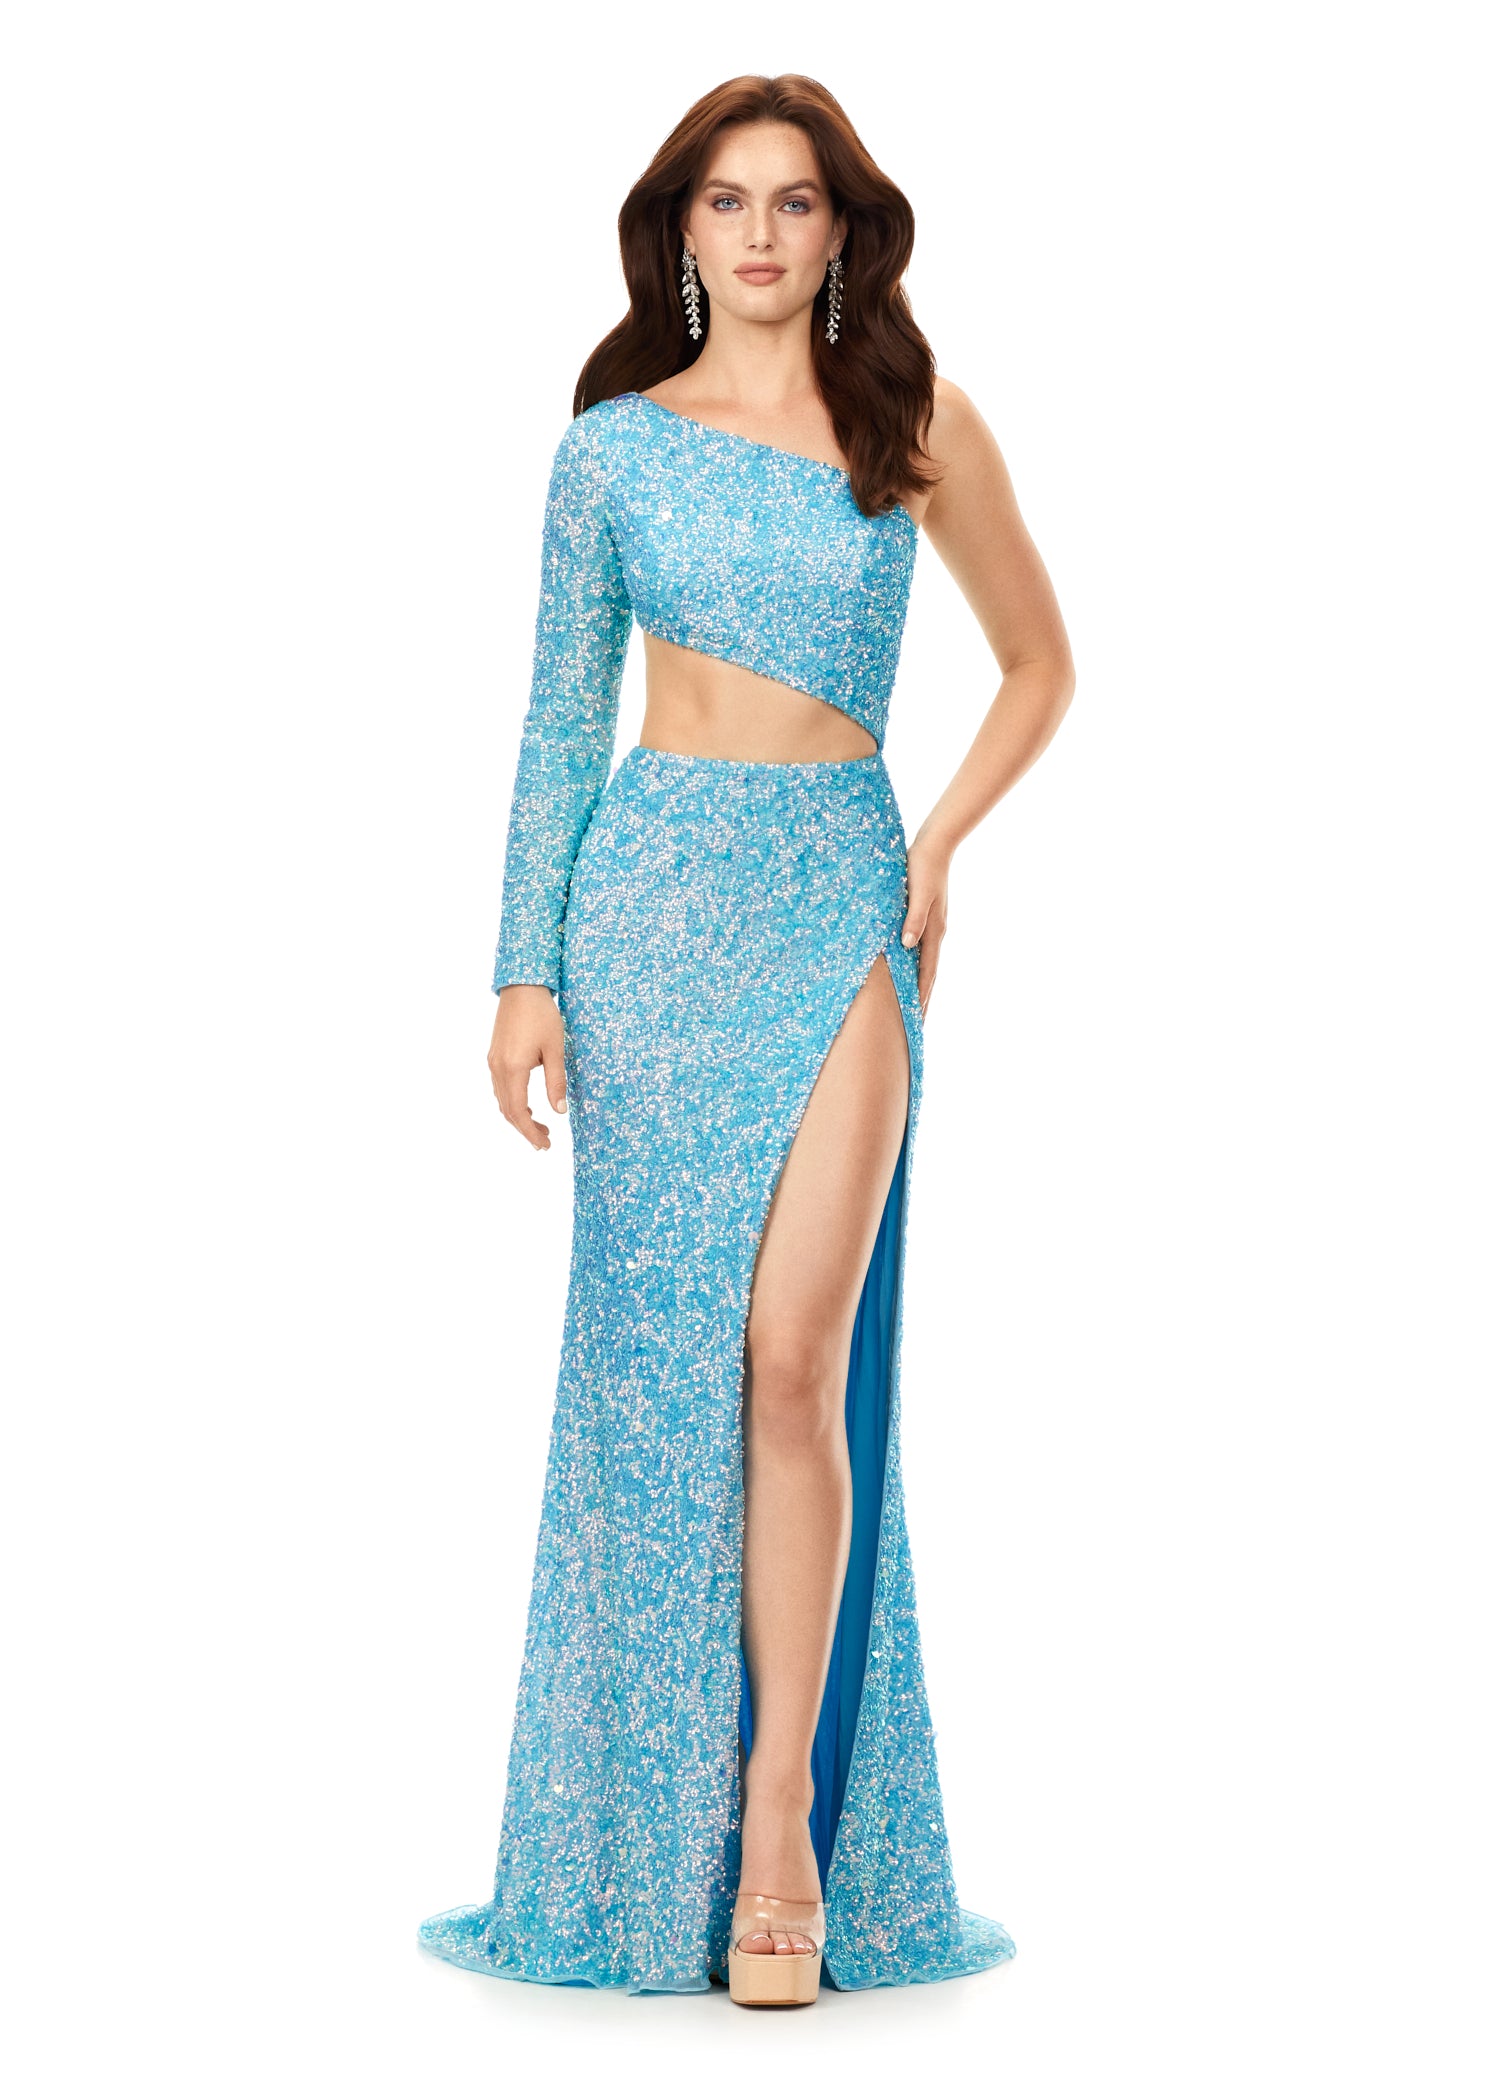 Ashley Lauren 11340 This sequin one shoulder gown features one sleeve and a shark bite cut out. The gown is complete with a left leg slit.